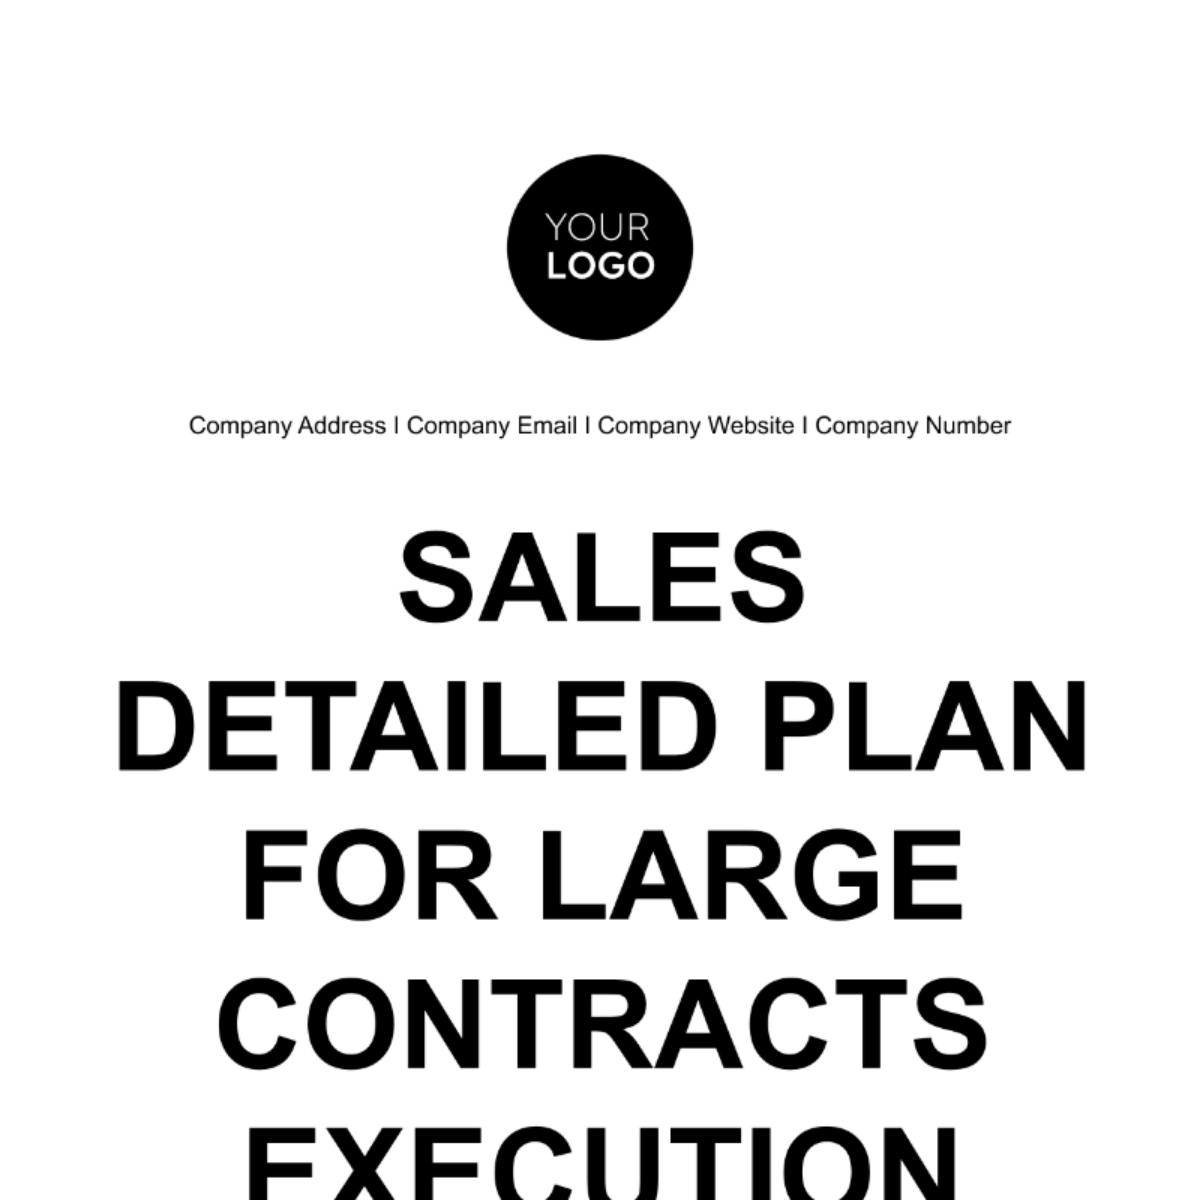 Sales Detailed Plan for Large Contracts Execution Template